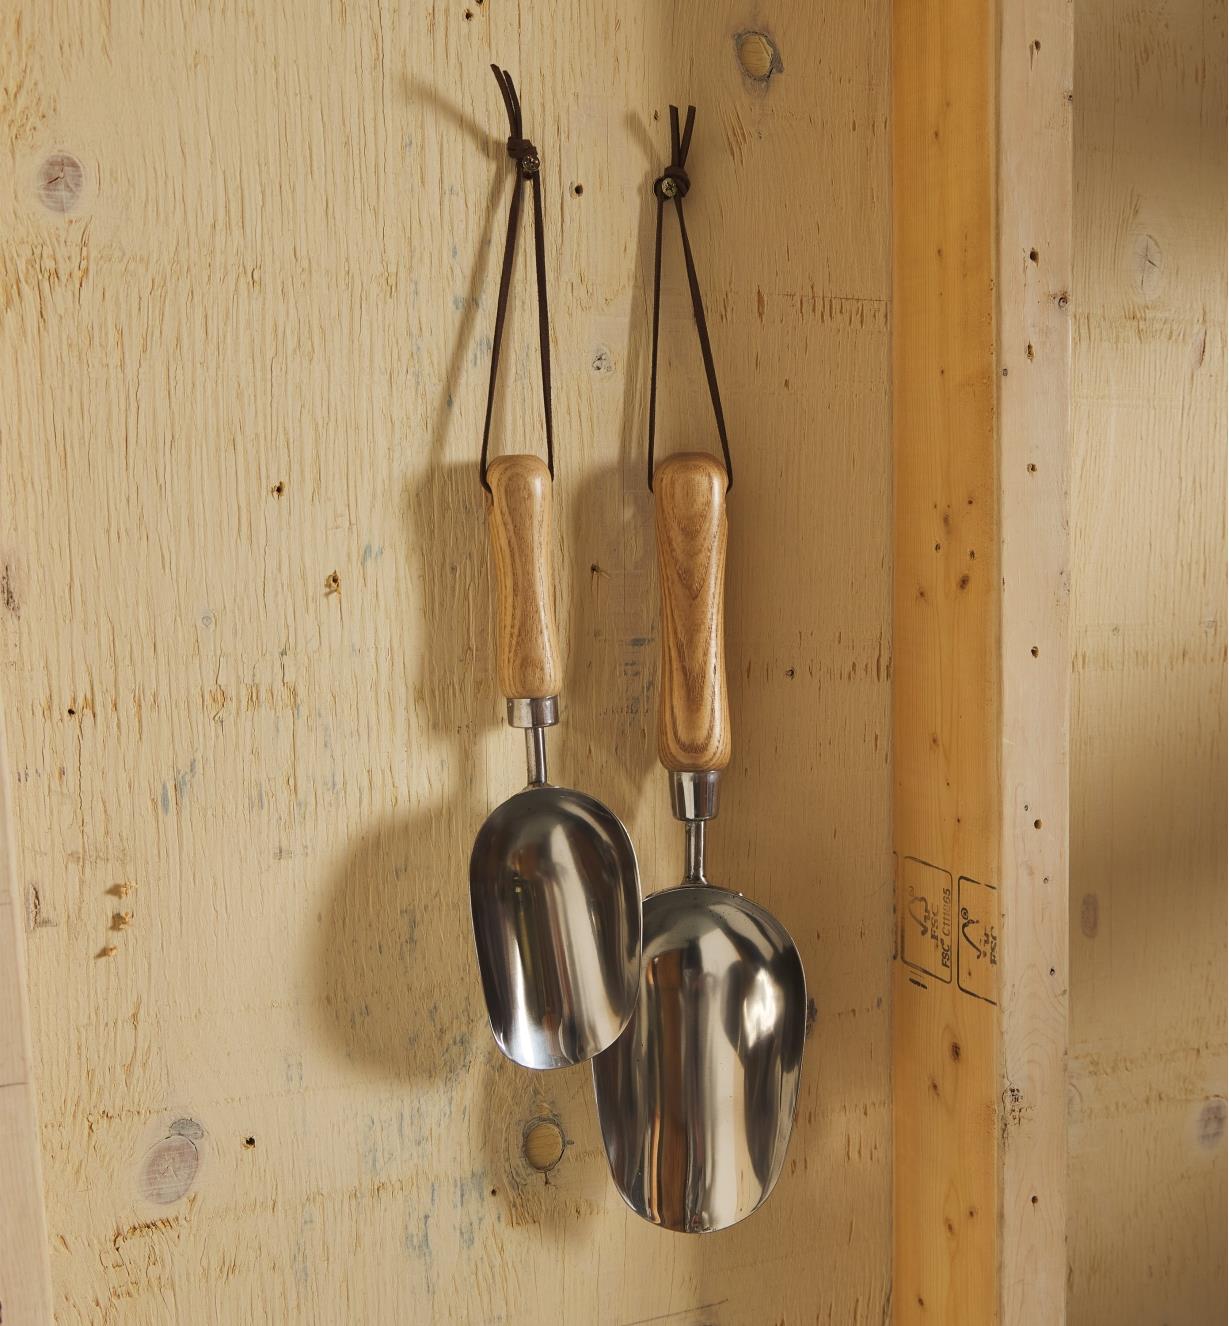 1/2 cup and 1 cup stainless-steel scoops hang on a wall